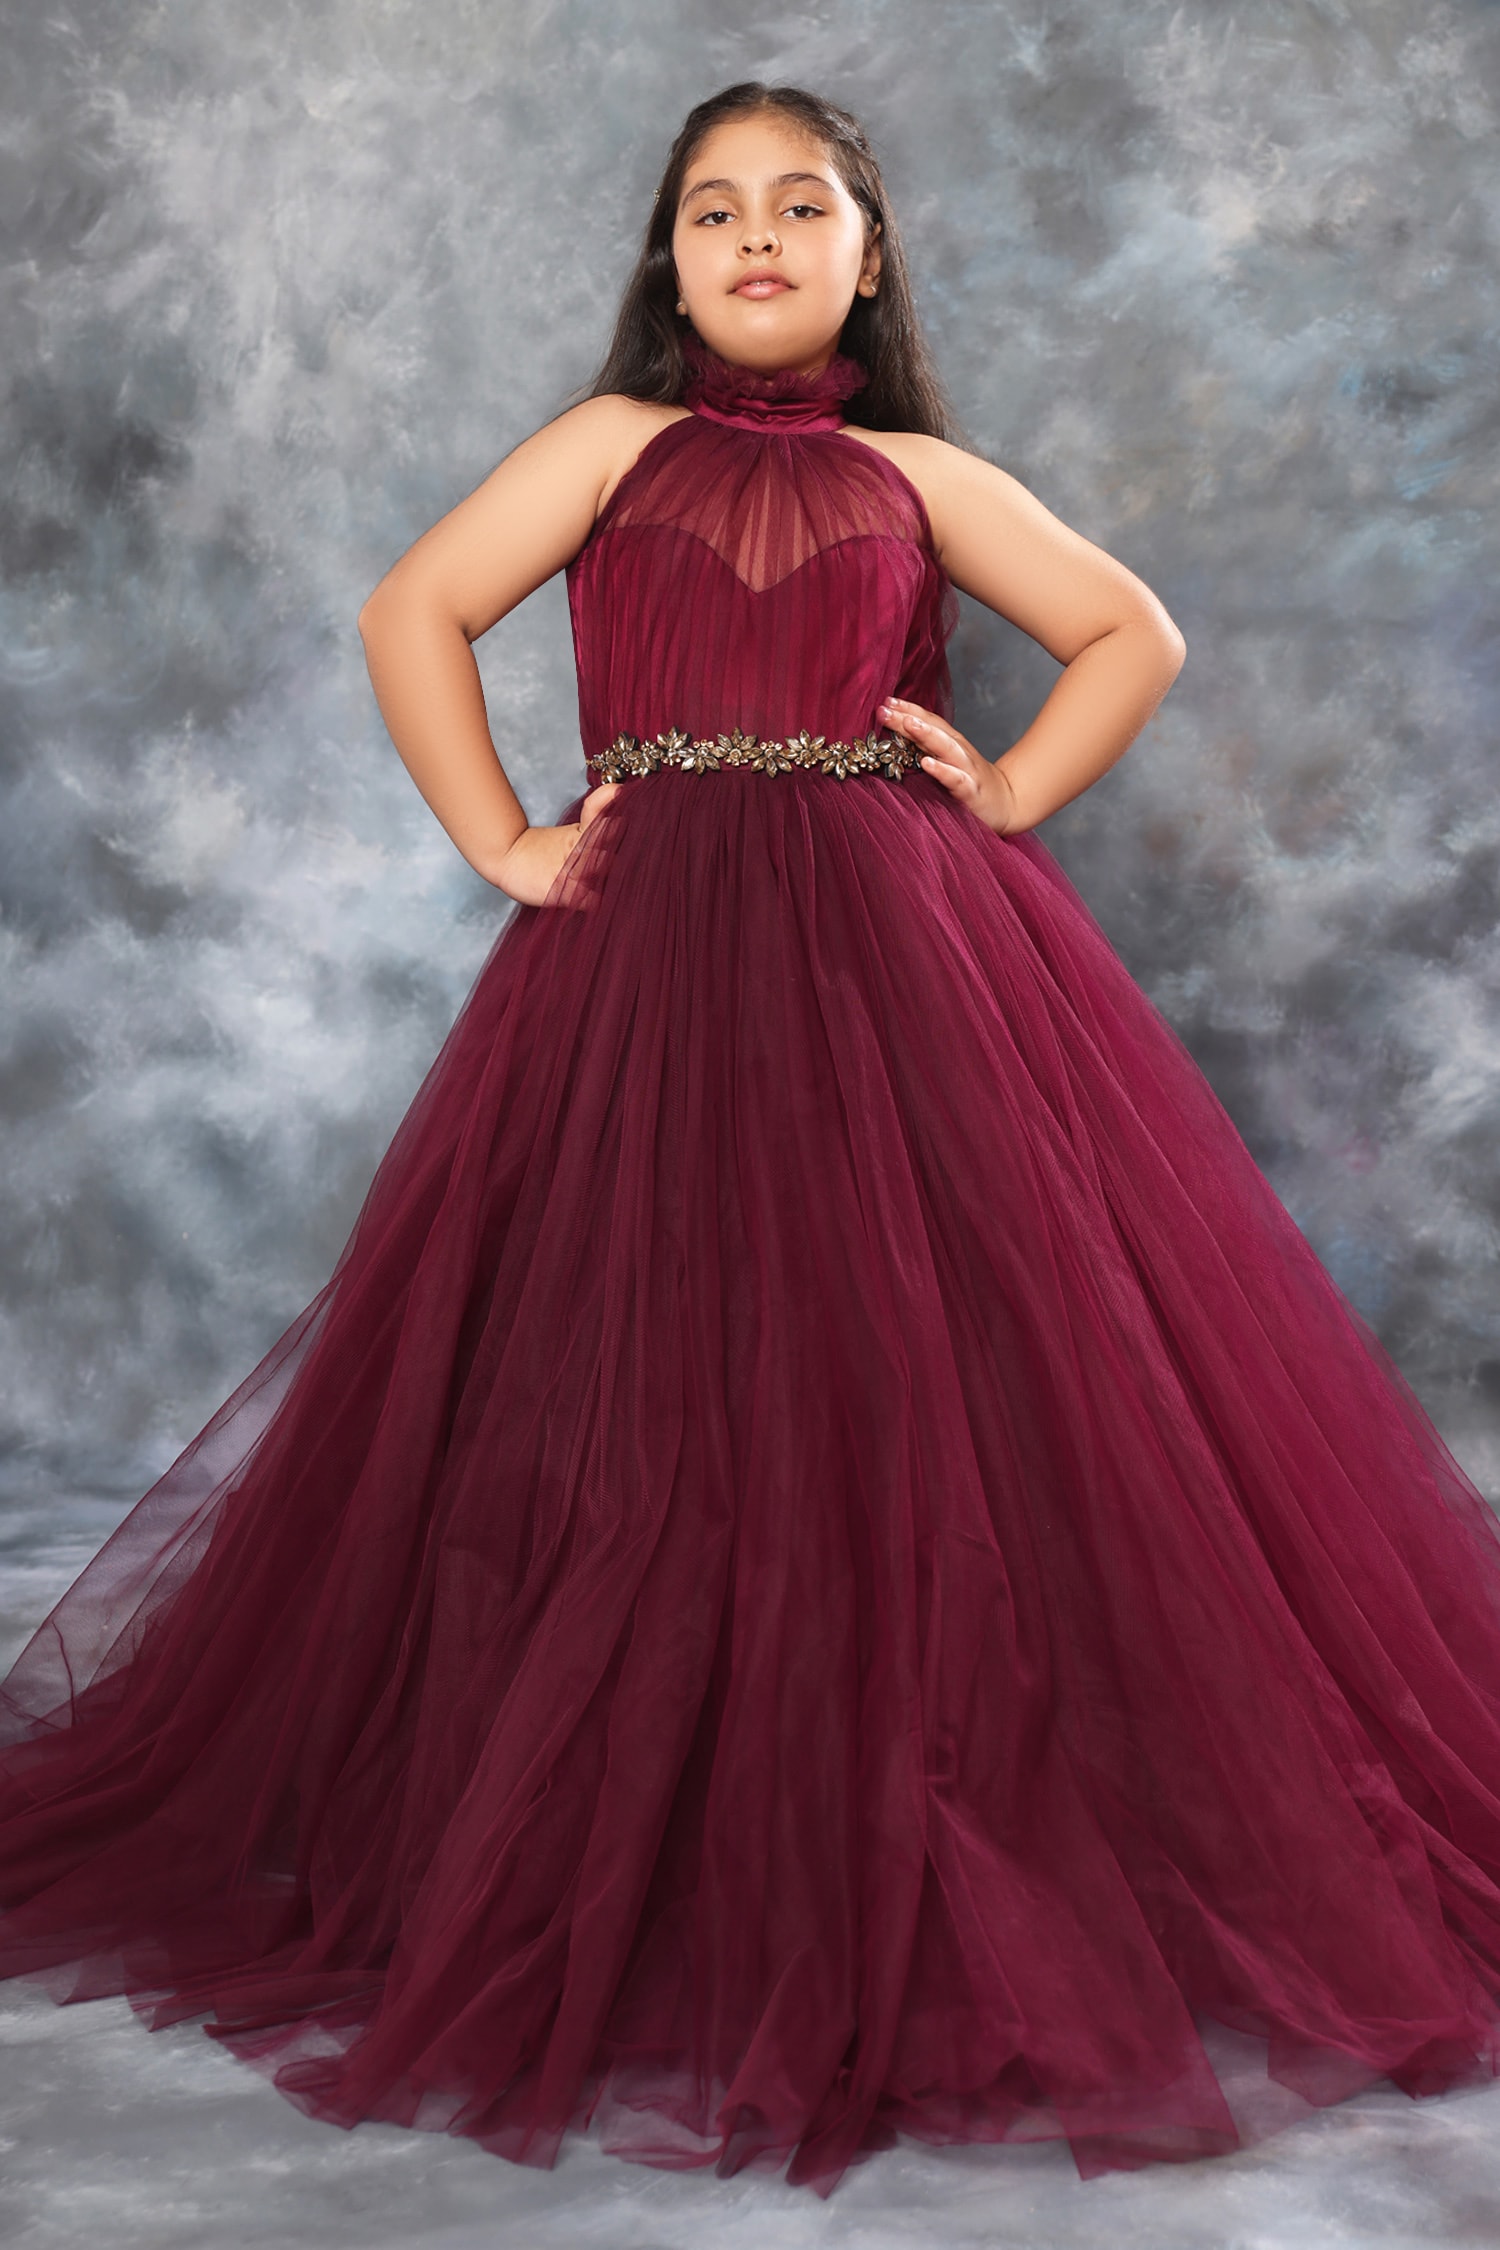 Prom Dress Guide for Short and Chubby Women - Petite Dressing